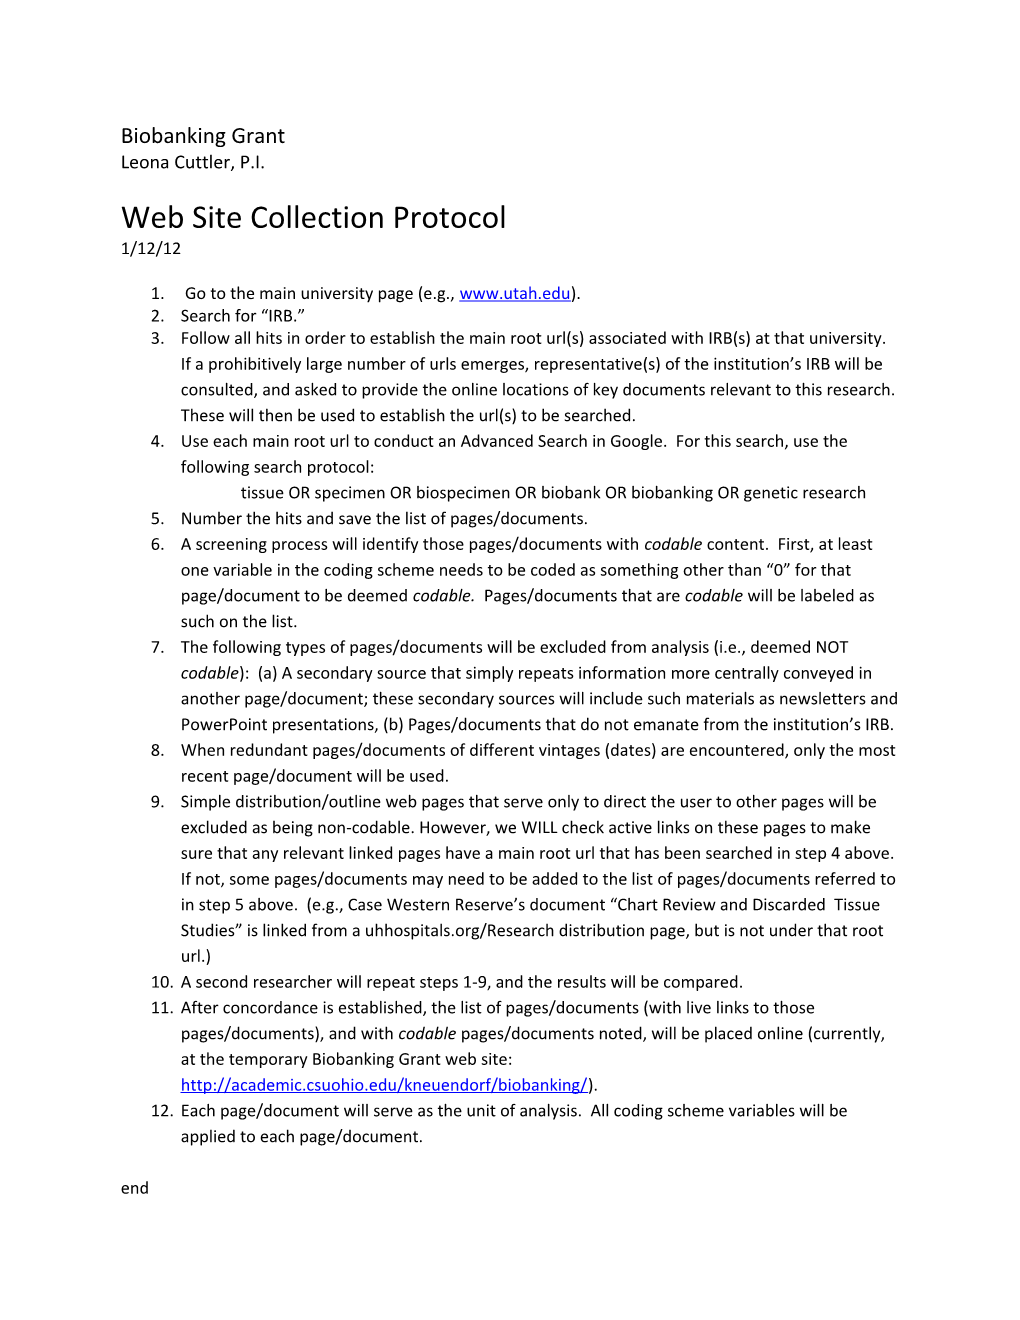 Web Site Collection Protocol